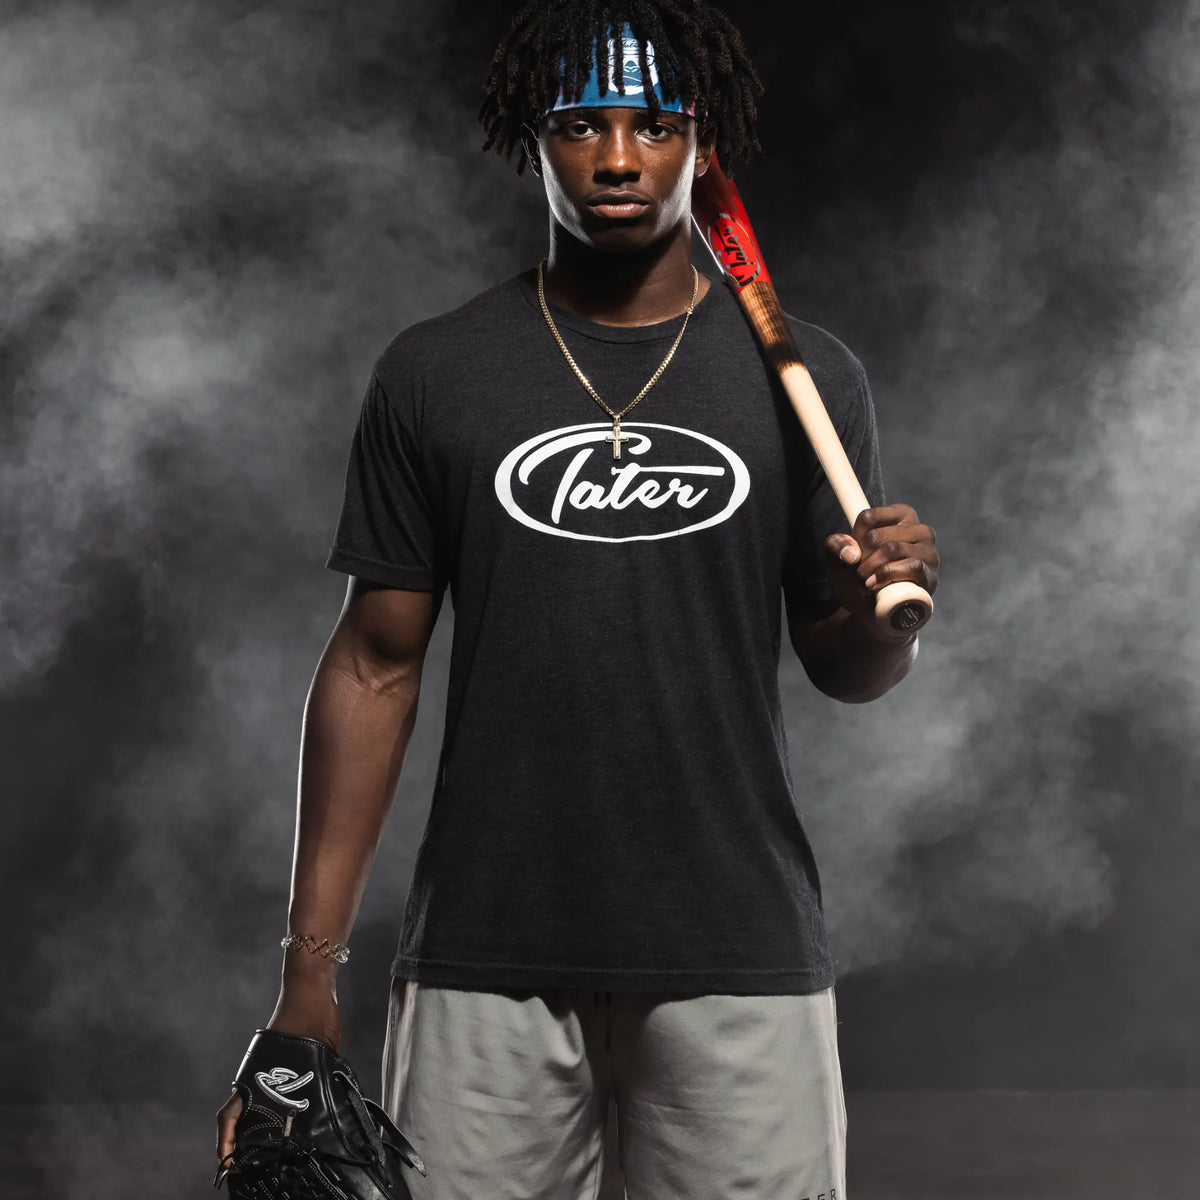 The image features an athlete clad in Tater Baseball gear, with a black logo tee, grey shorts, a baseball bat, and a glove, set against a dramatic smoky backdrop for a promotional look.